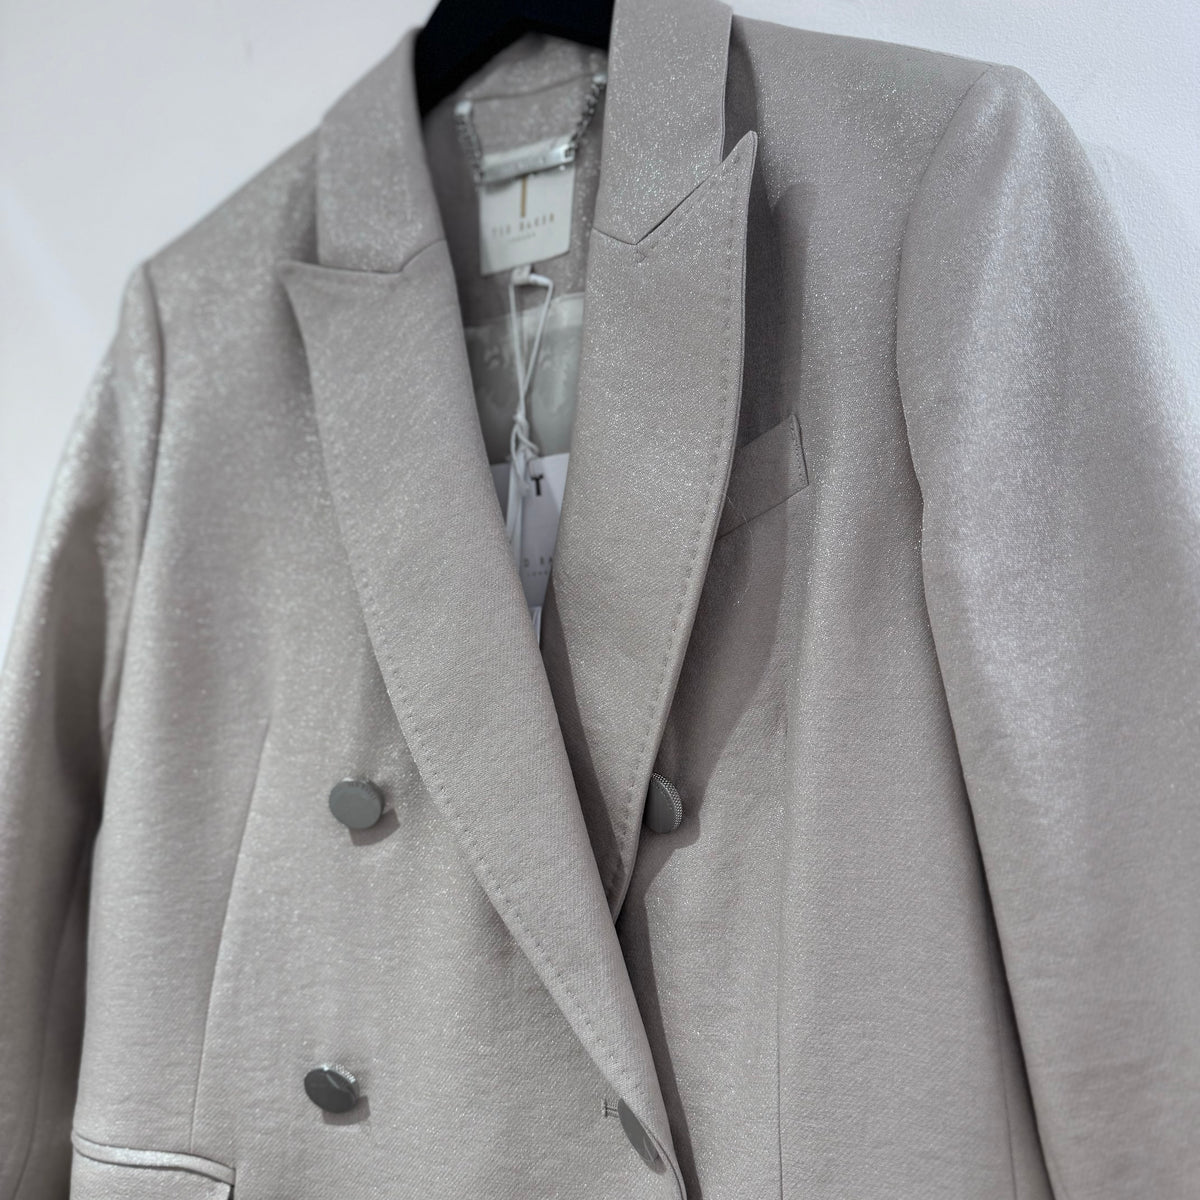 Ted Baker London double breasted blazer Pink Champagne Size 2